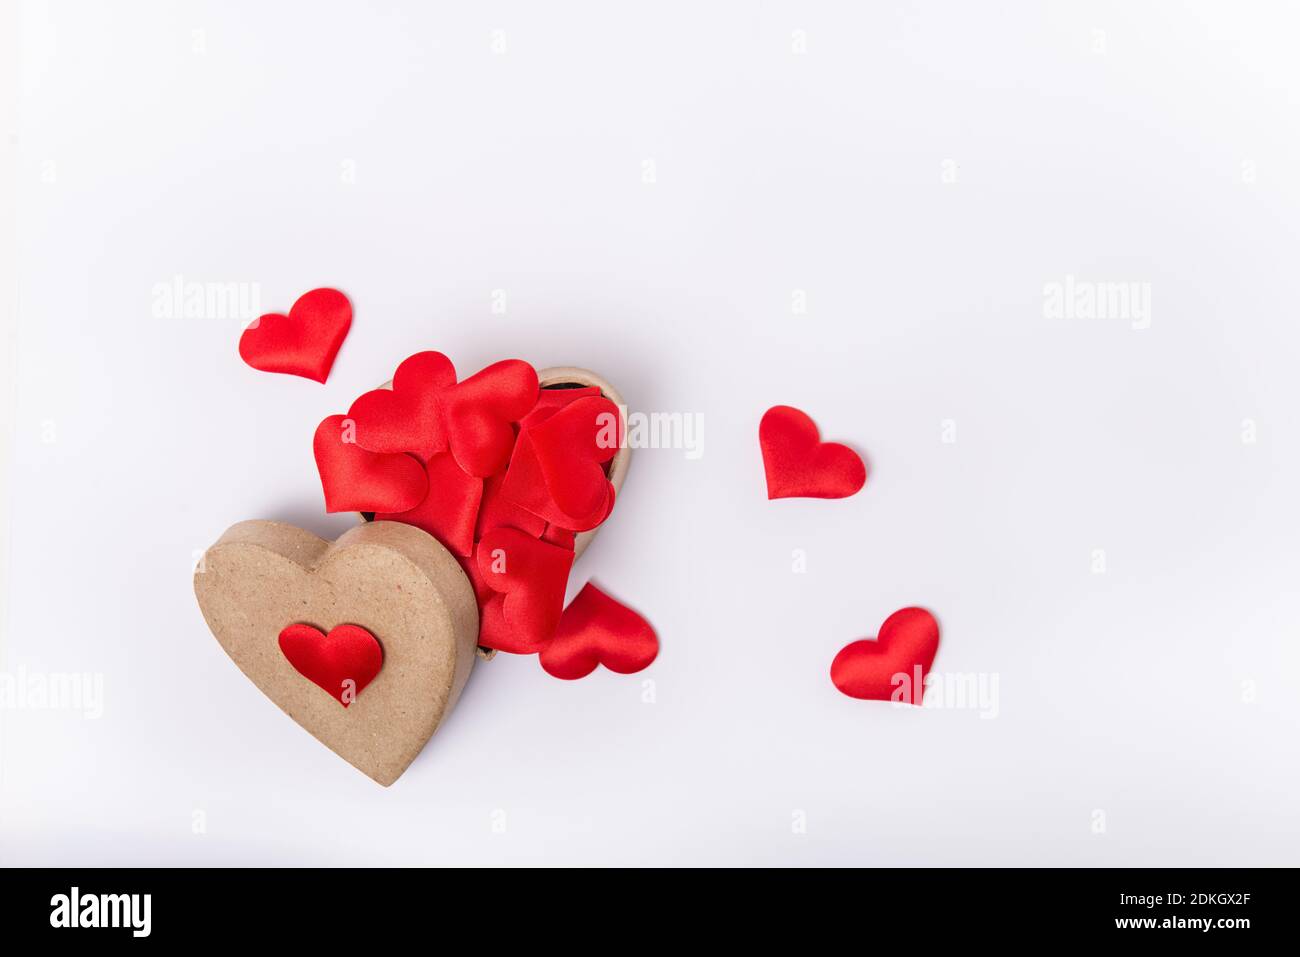 Top View heart-shaped box full of red fabric hearts on the white background. Valentine's day background. Gathering likes concept. Flat lay. Selective Stock Photo